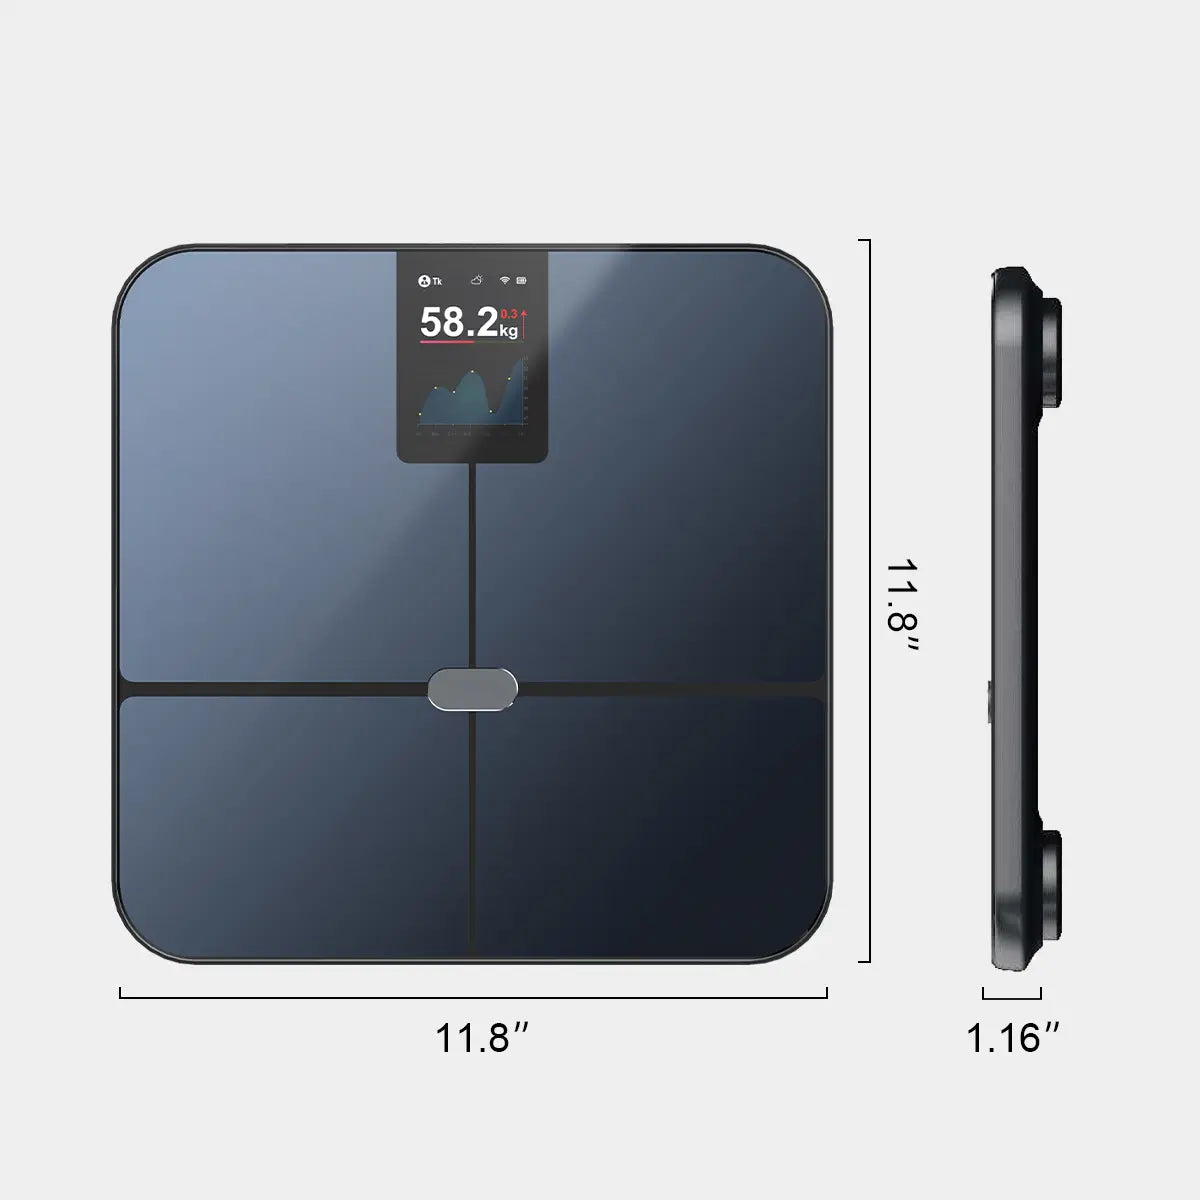 Tousains smart scale M1 with space saving design